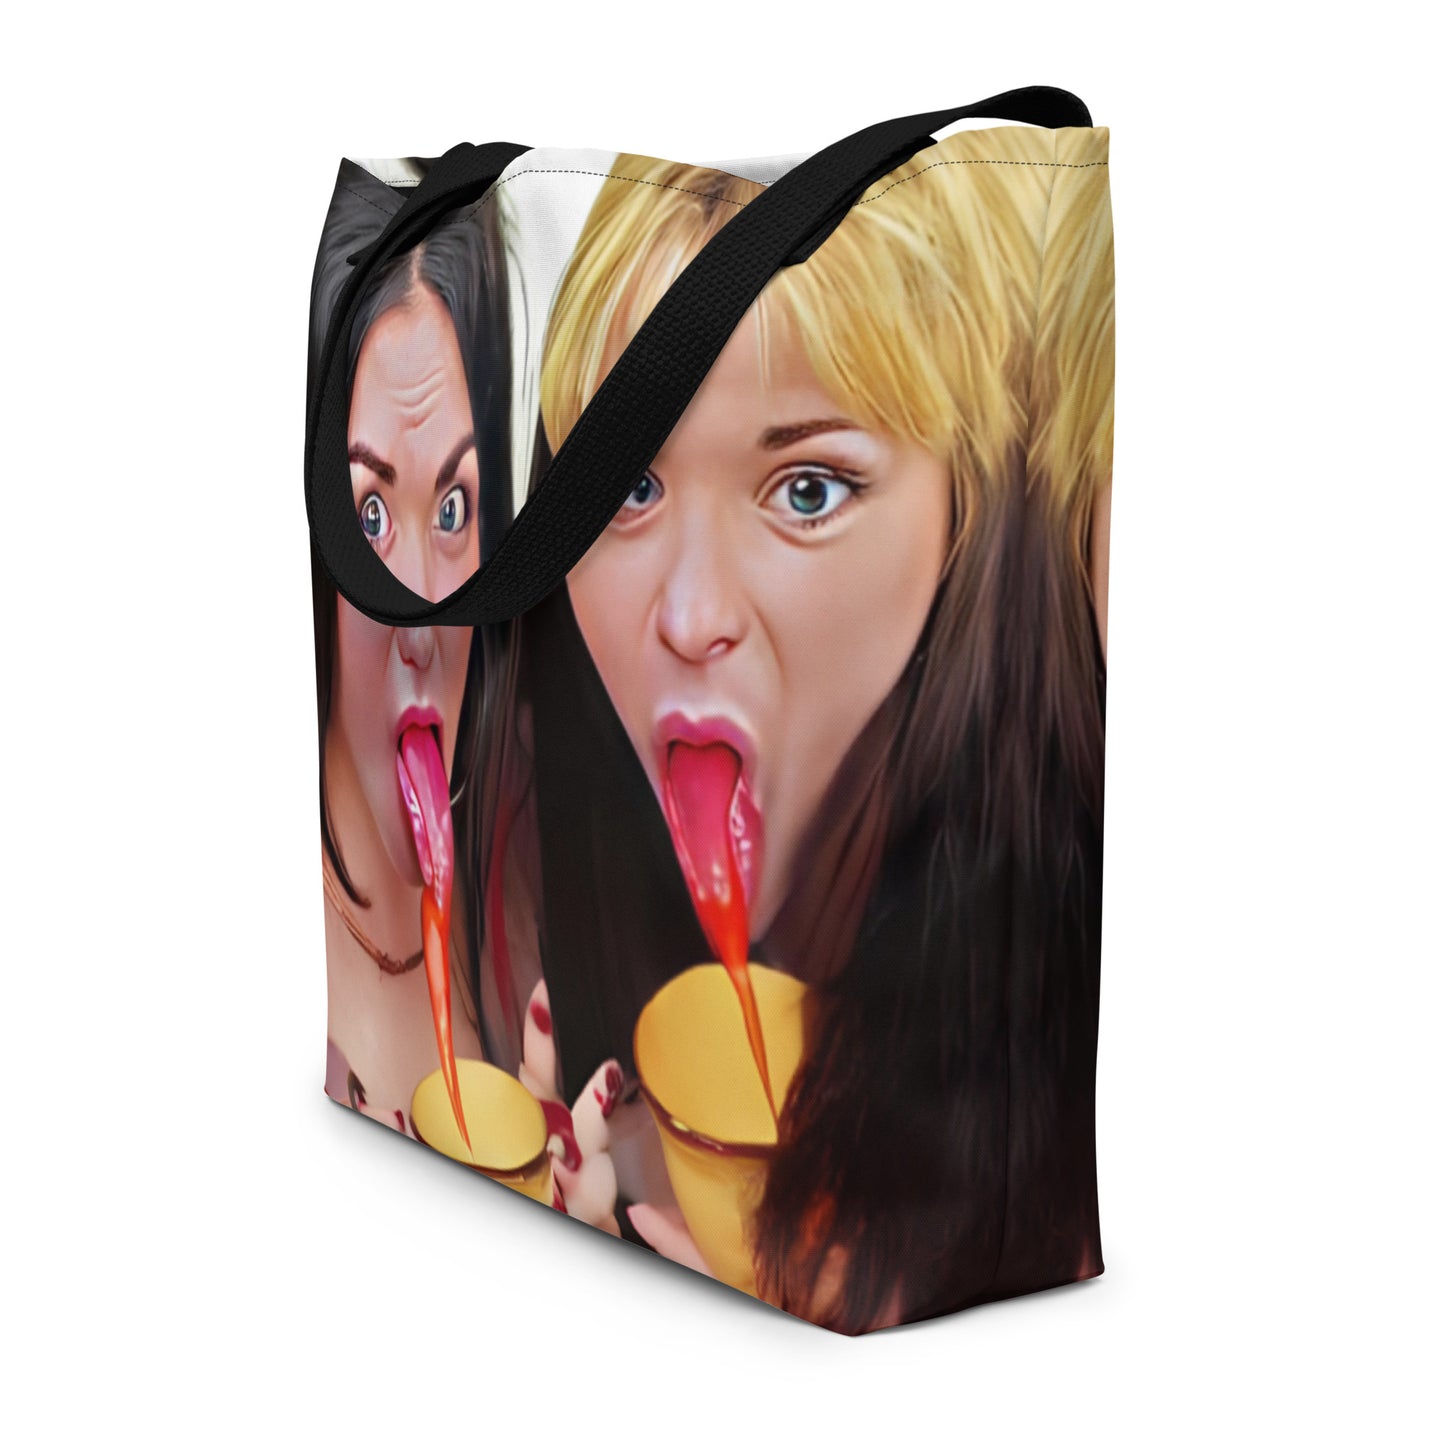 "D0UBLE TR0UBLE TWINZ" tote bag